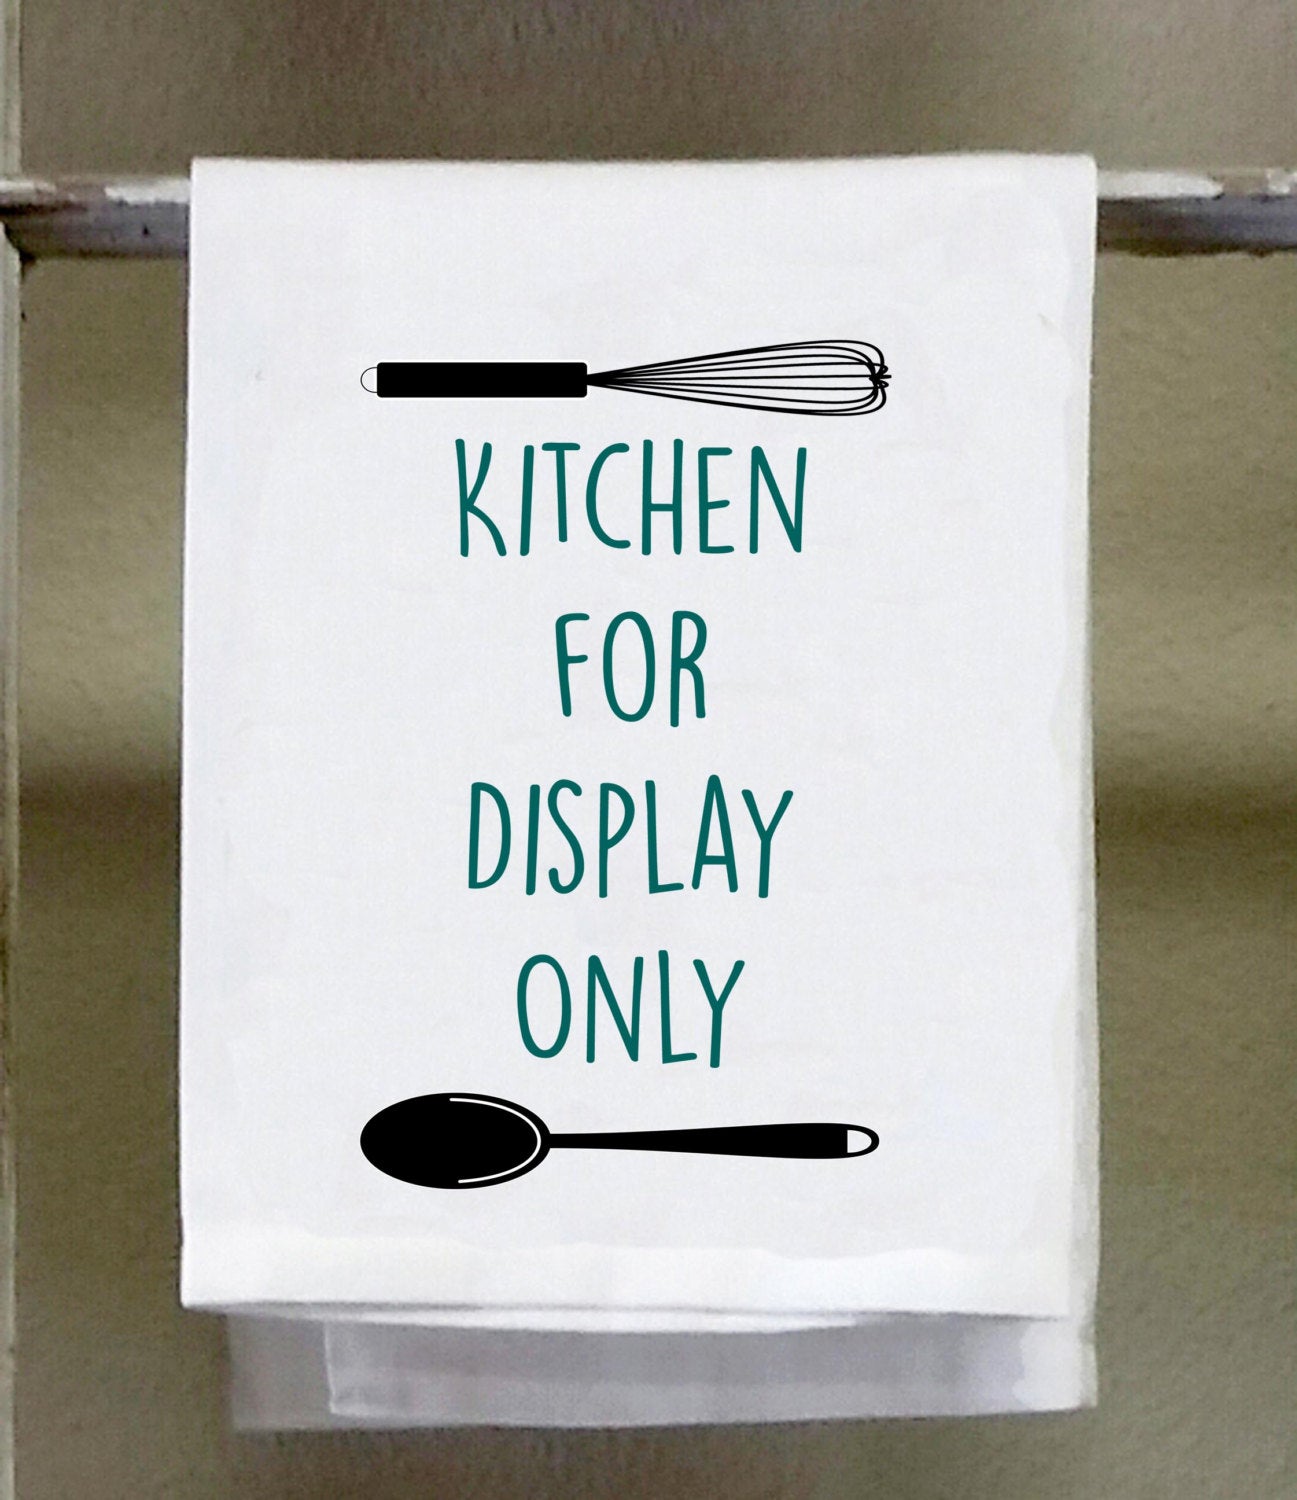 Kitchen, Dish Towel, Kitchen for display only